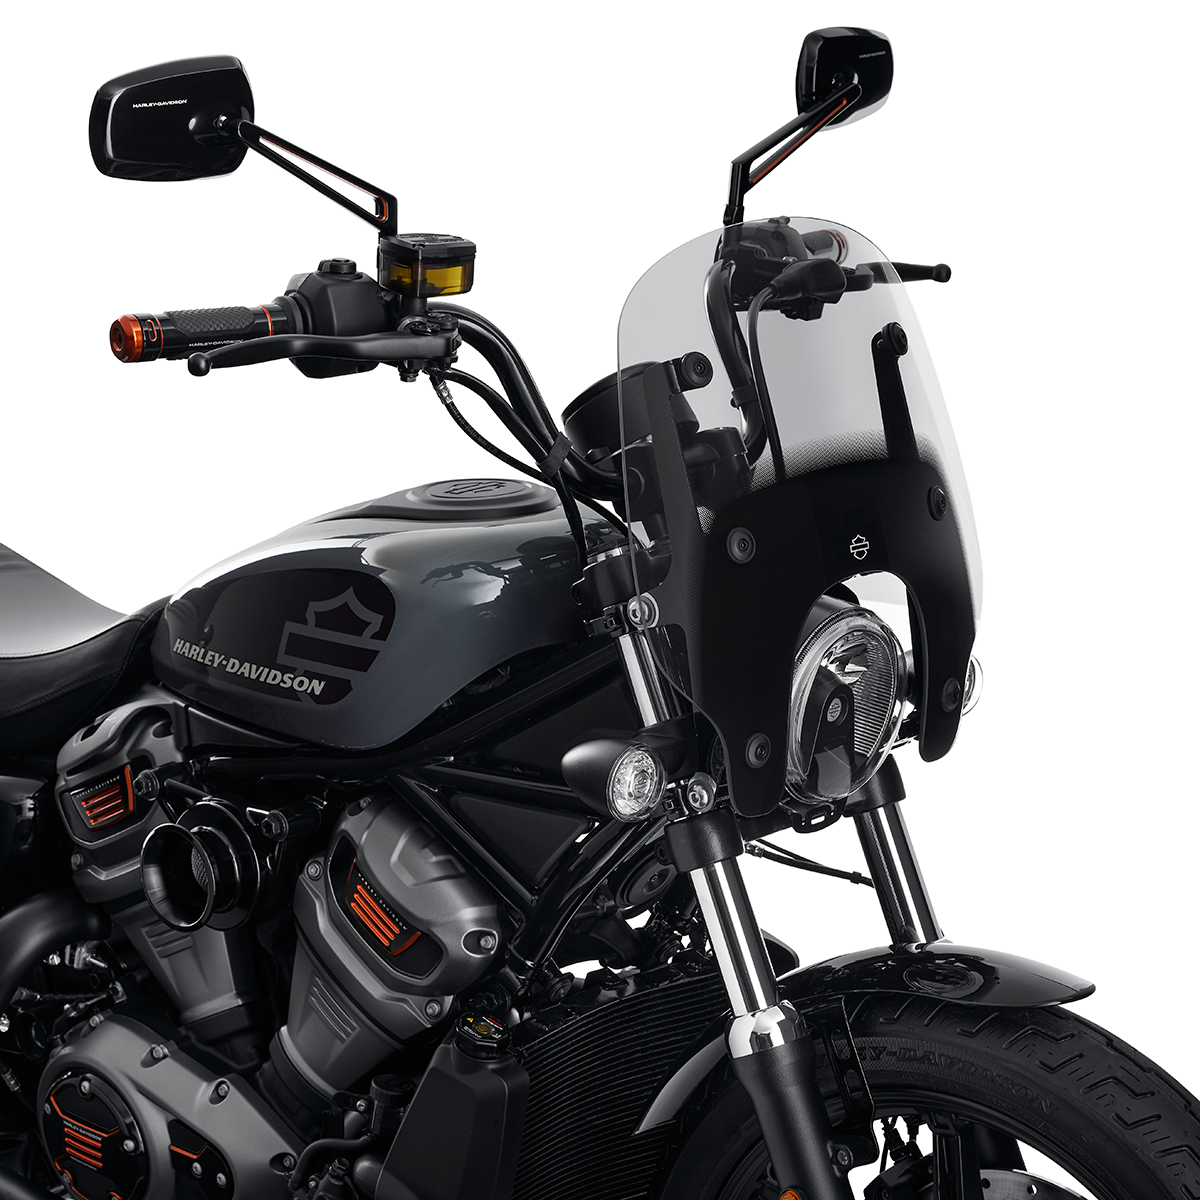 Harley-Davidson Quick-Release Compact Windshield